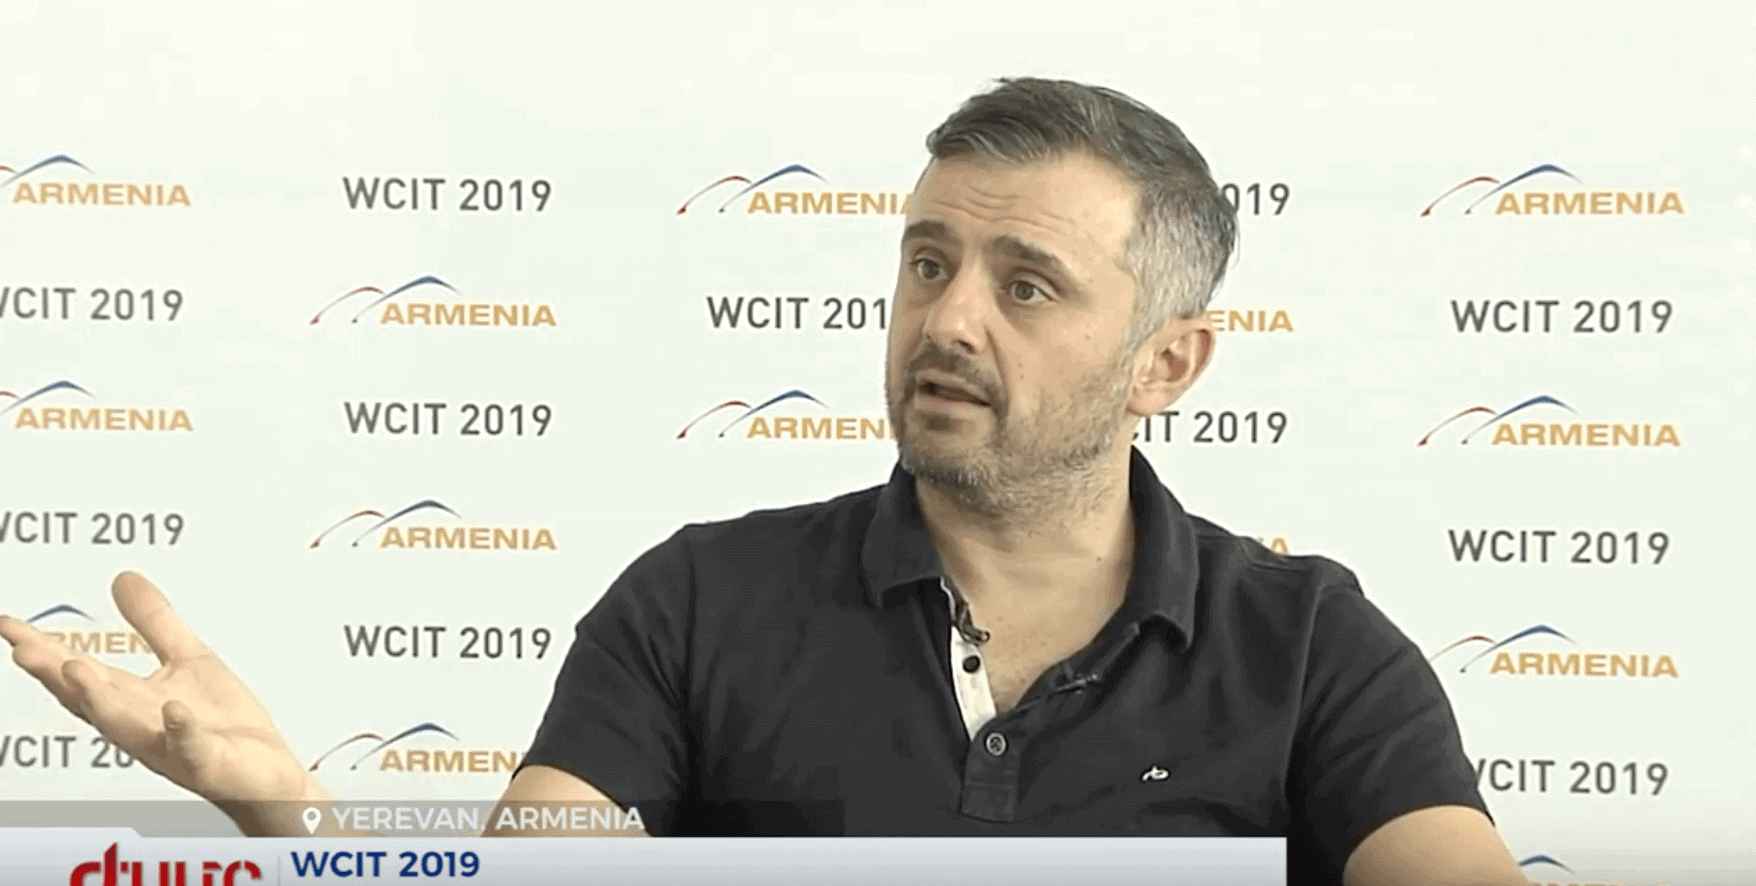 Exclusive interview with Gary Vaynerchuk, the chairman of VaynerX